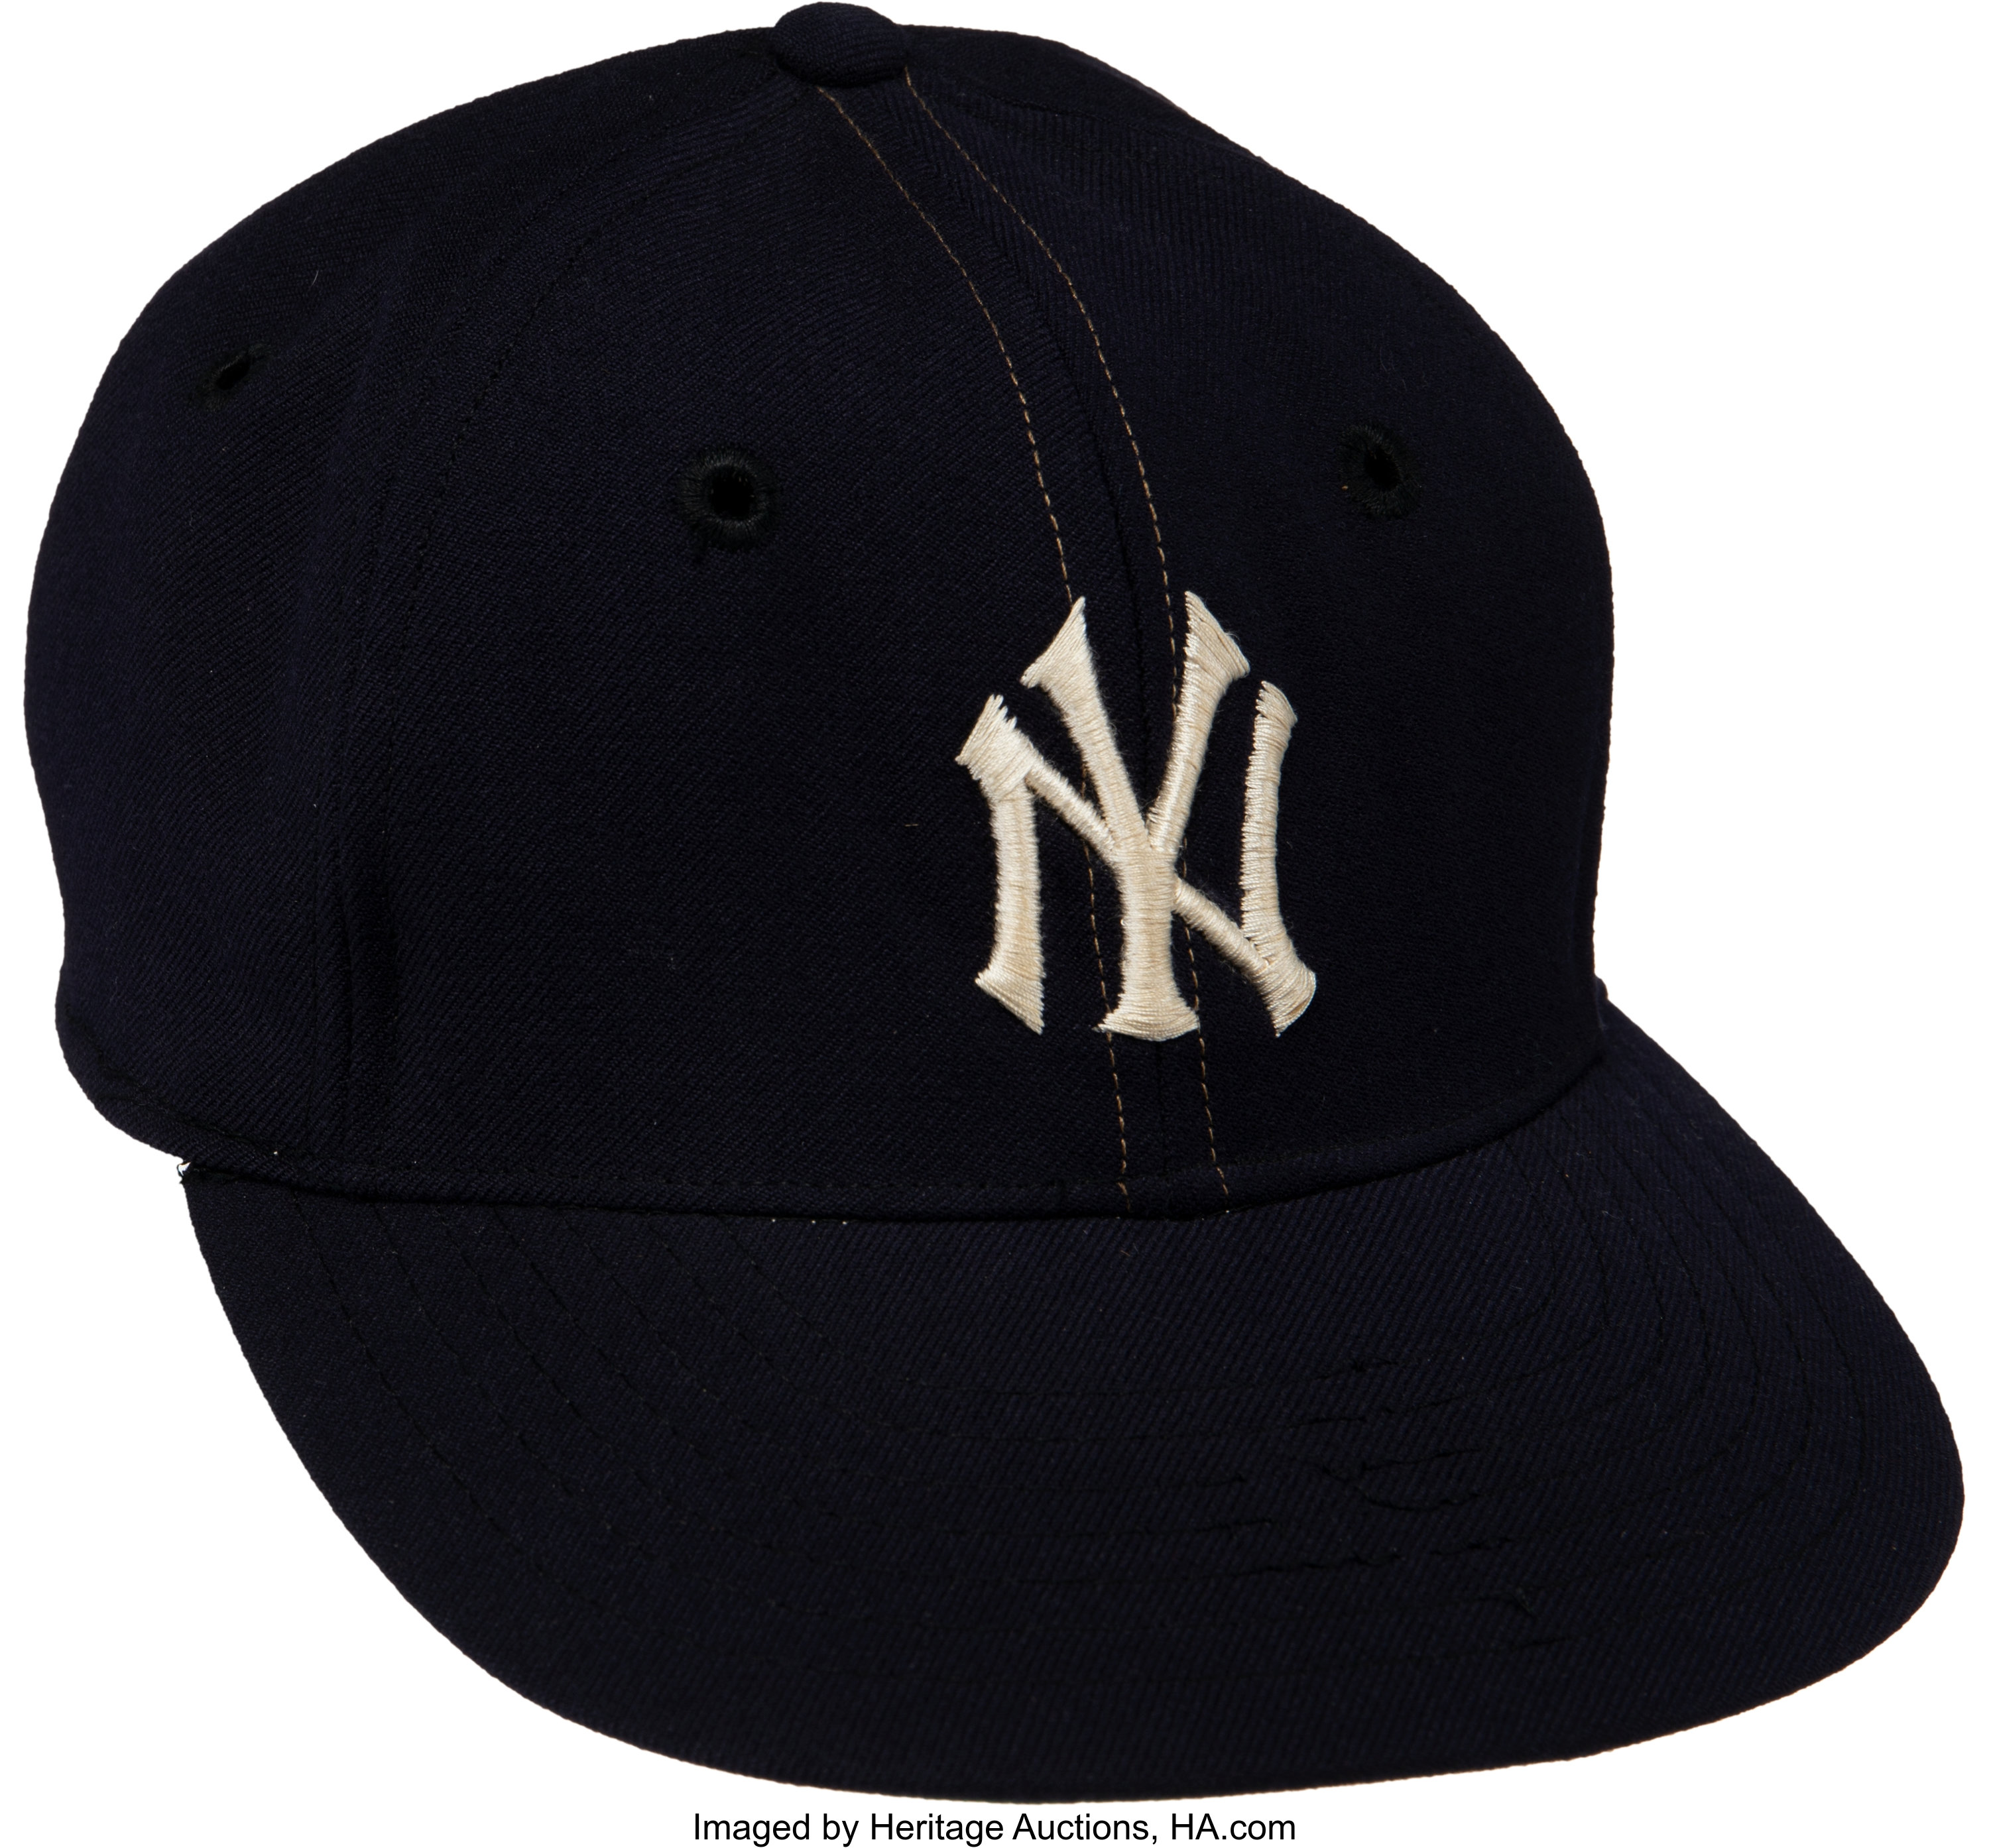 Don Larsen to auction off 1956 perfect-game uniform